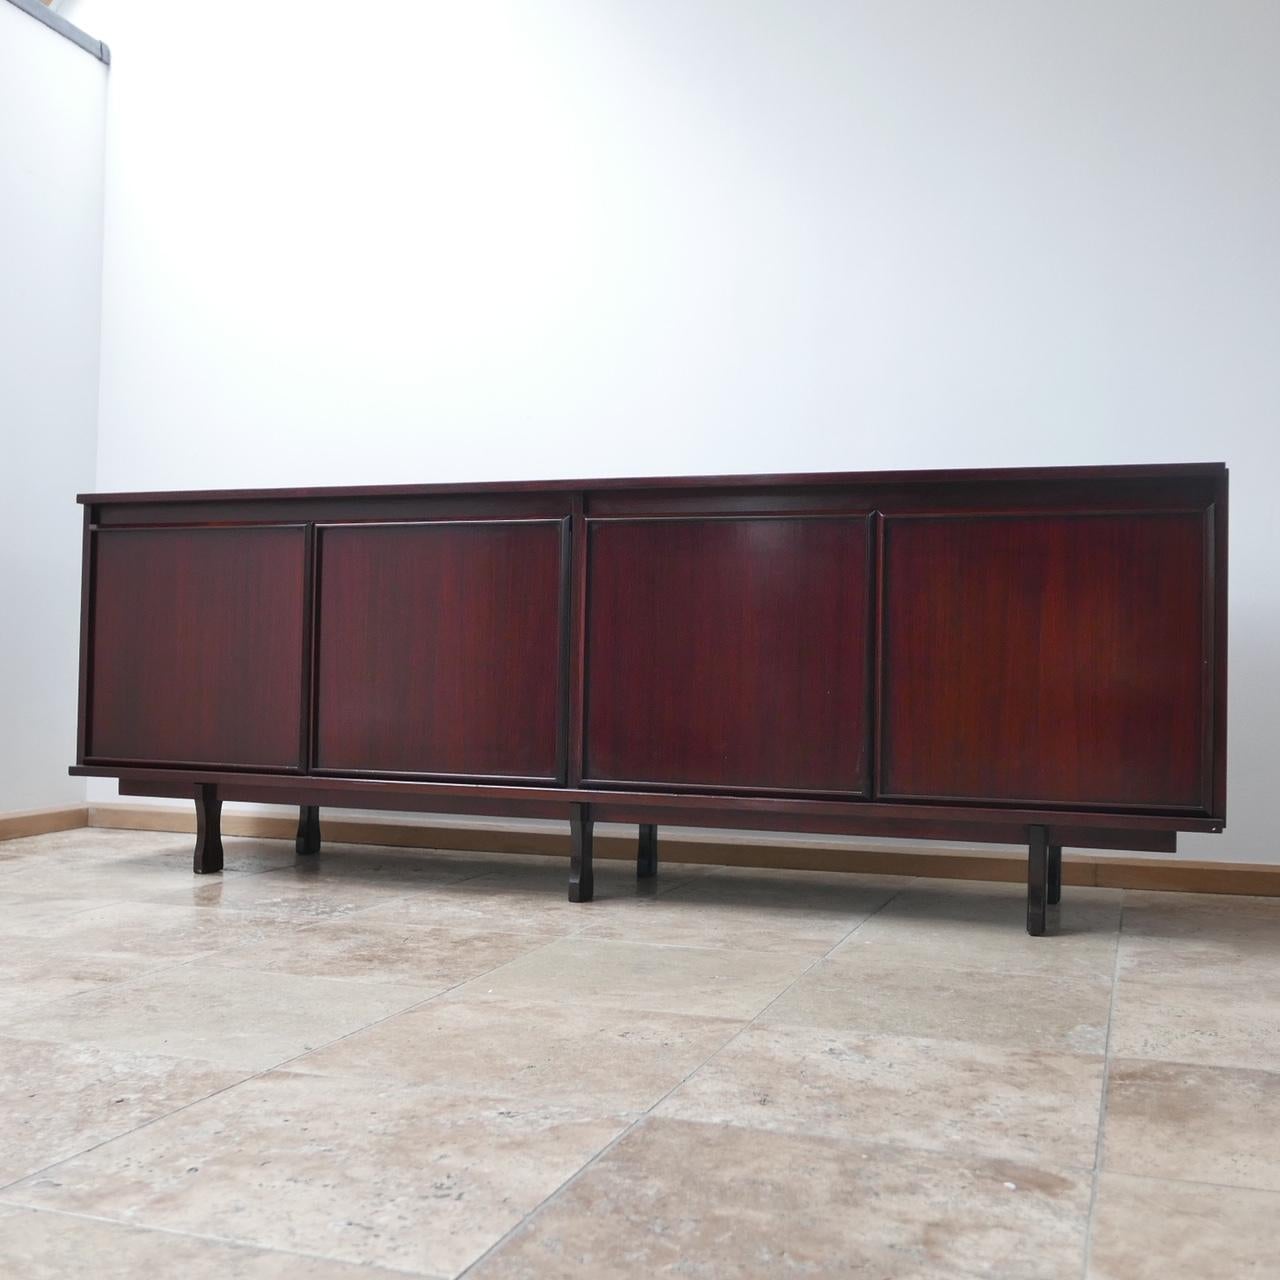 Italian, midcentury sideboard.

circa 1960s, by Giovanni Ausenda for Stilwood.

Rosewood veneer.

Some wear but generally good condition.

Dimensions: 53 D x 214 W x 74.5 H in cm.
 